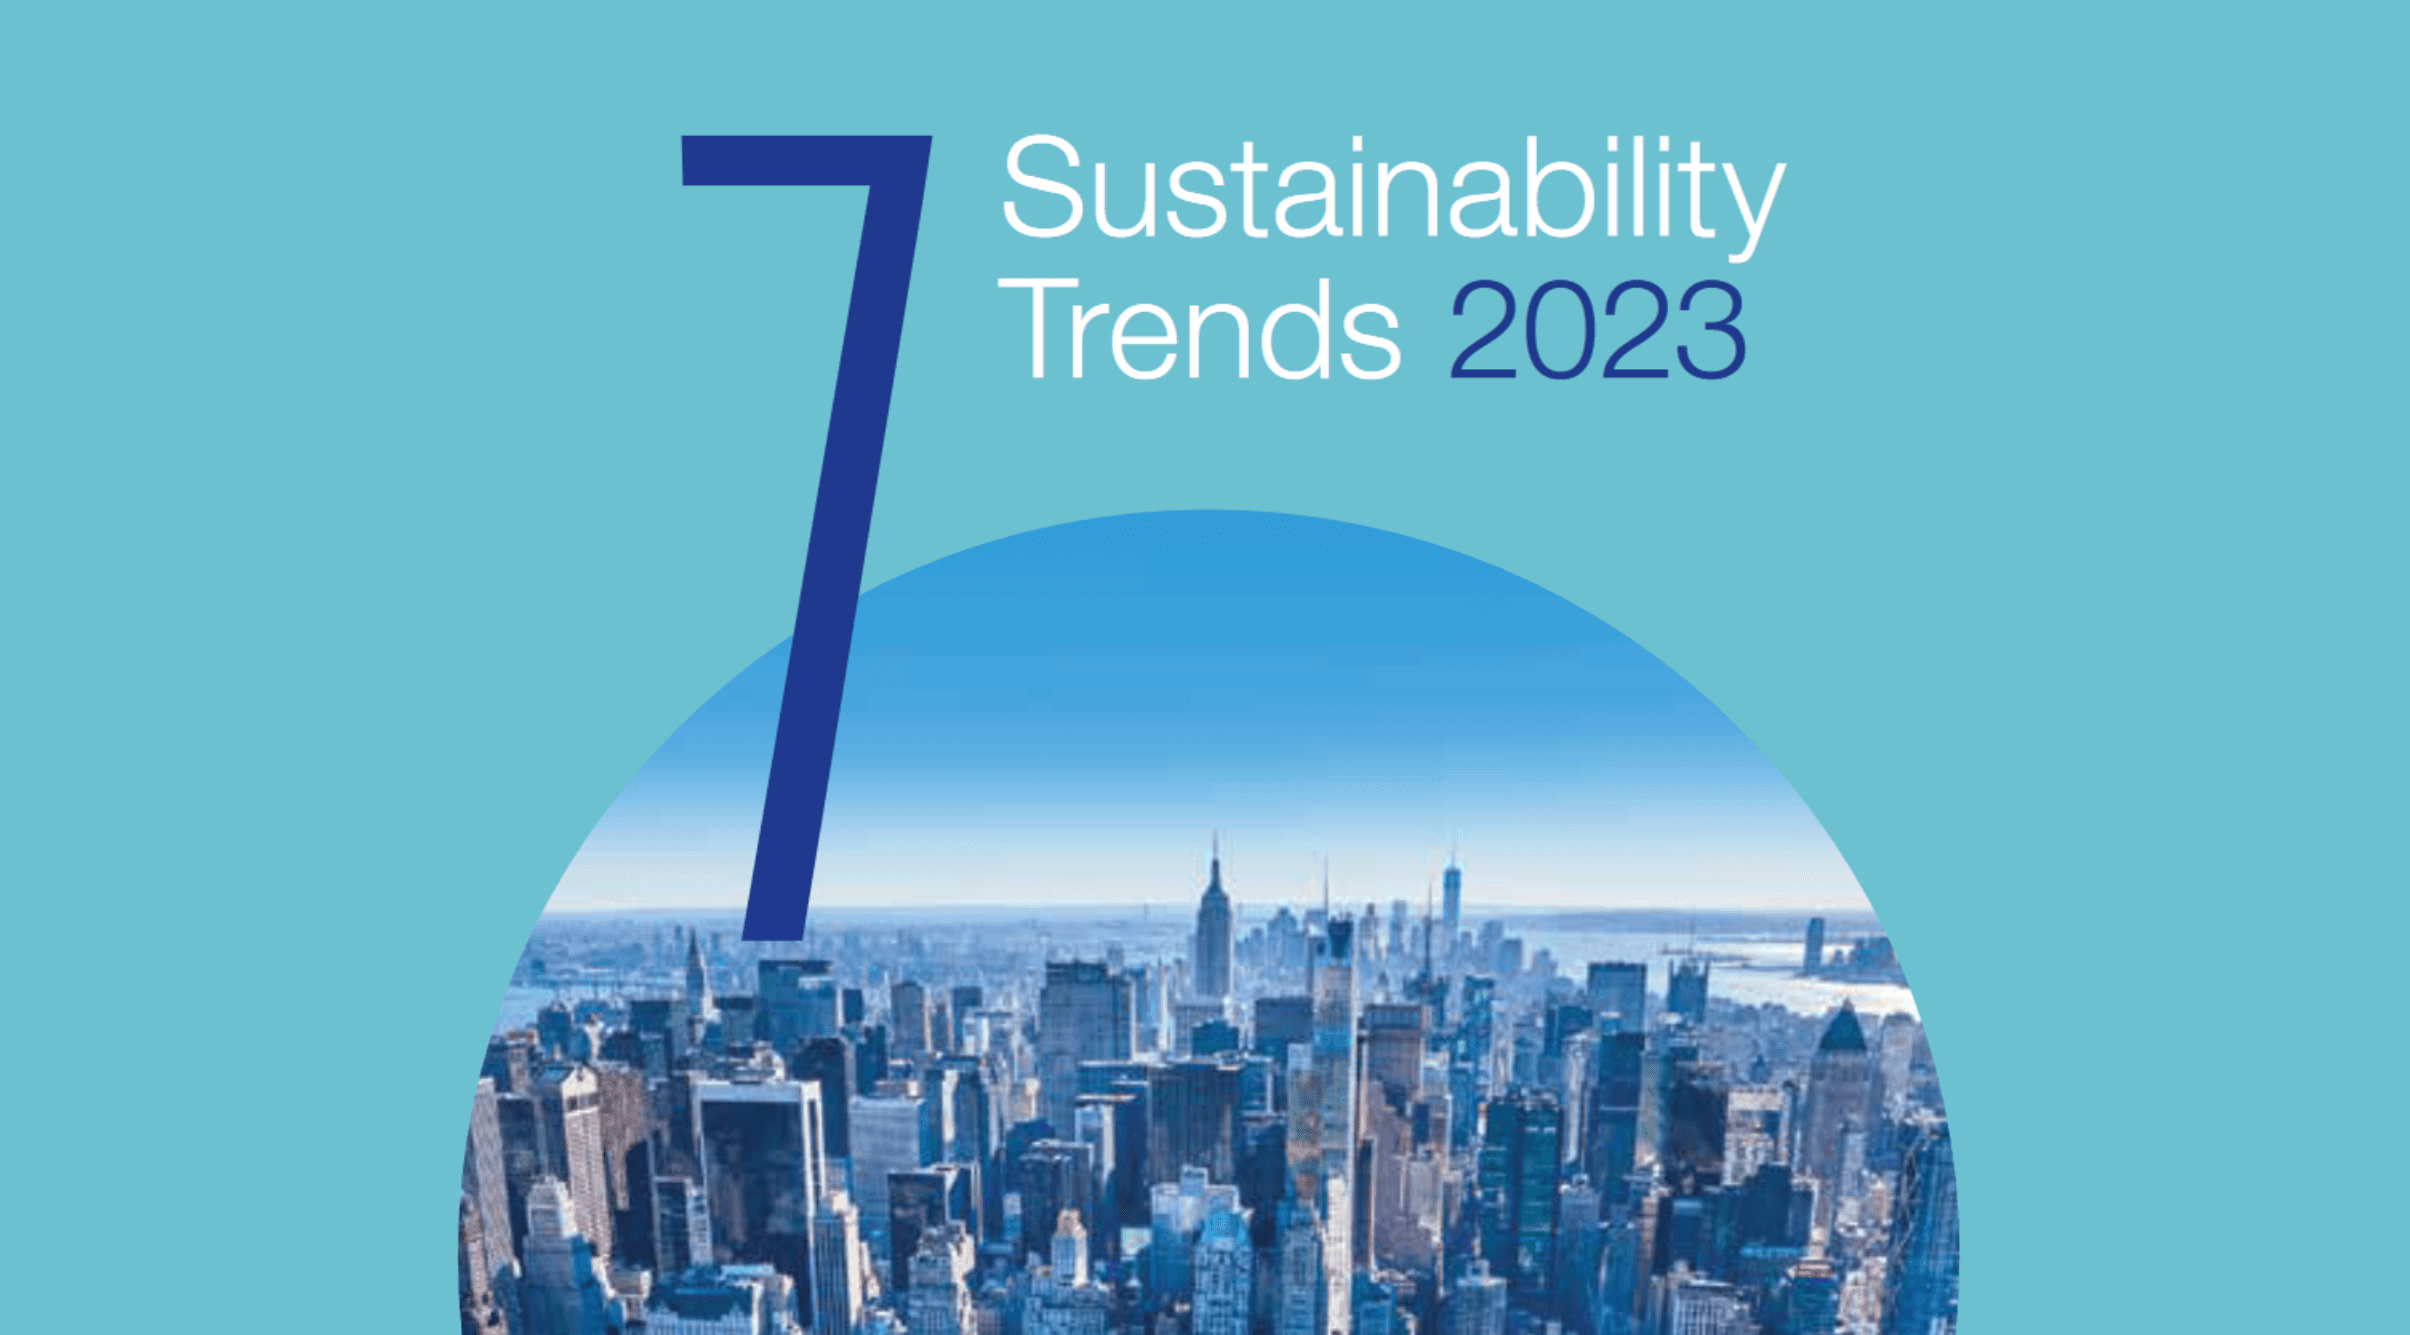 7 Trends pdf cover